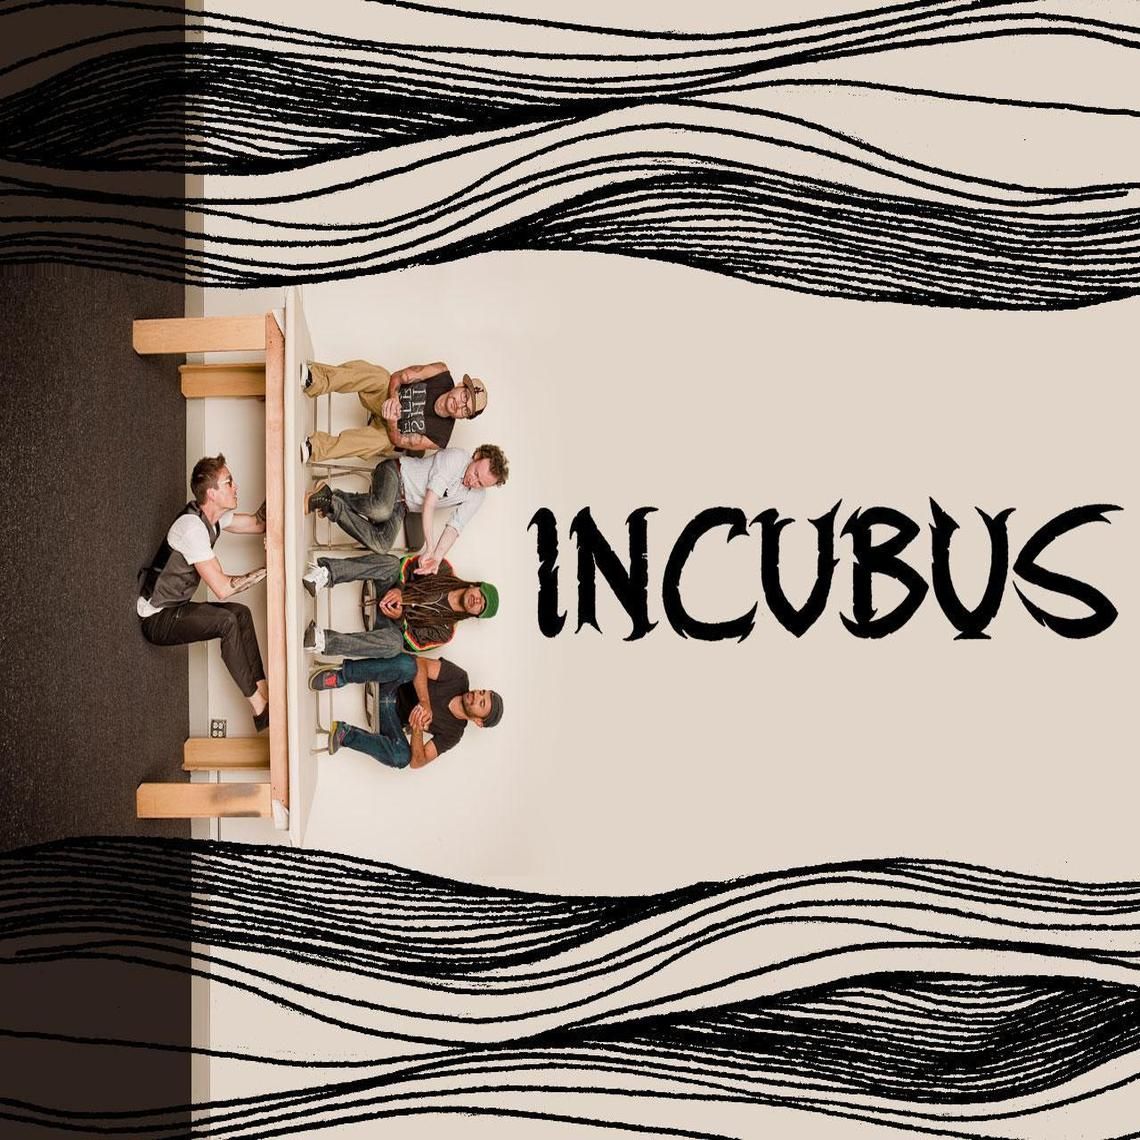 Incubus Wallpaper For Android - HD Wallpaper 